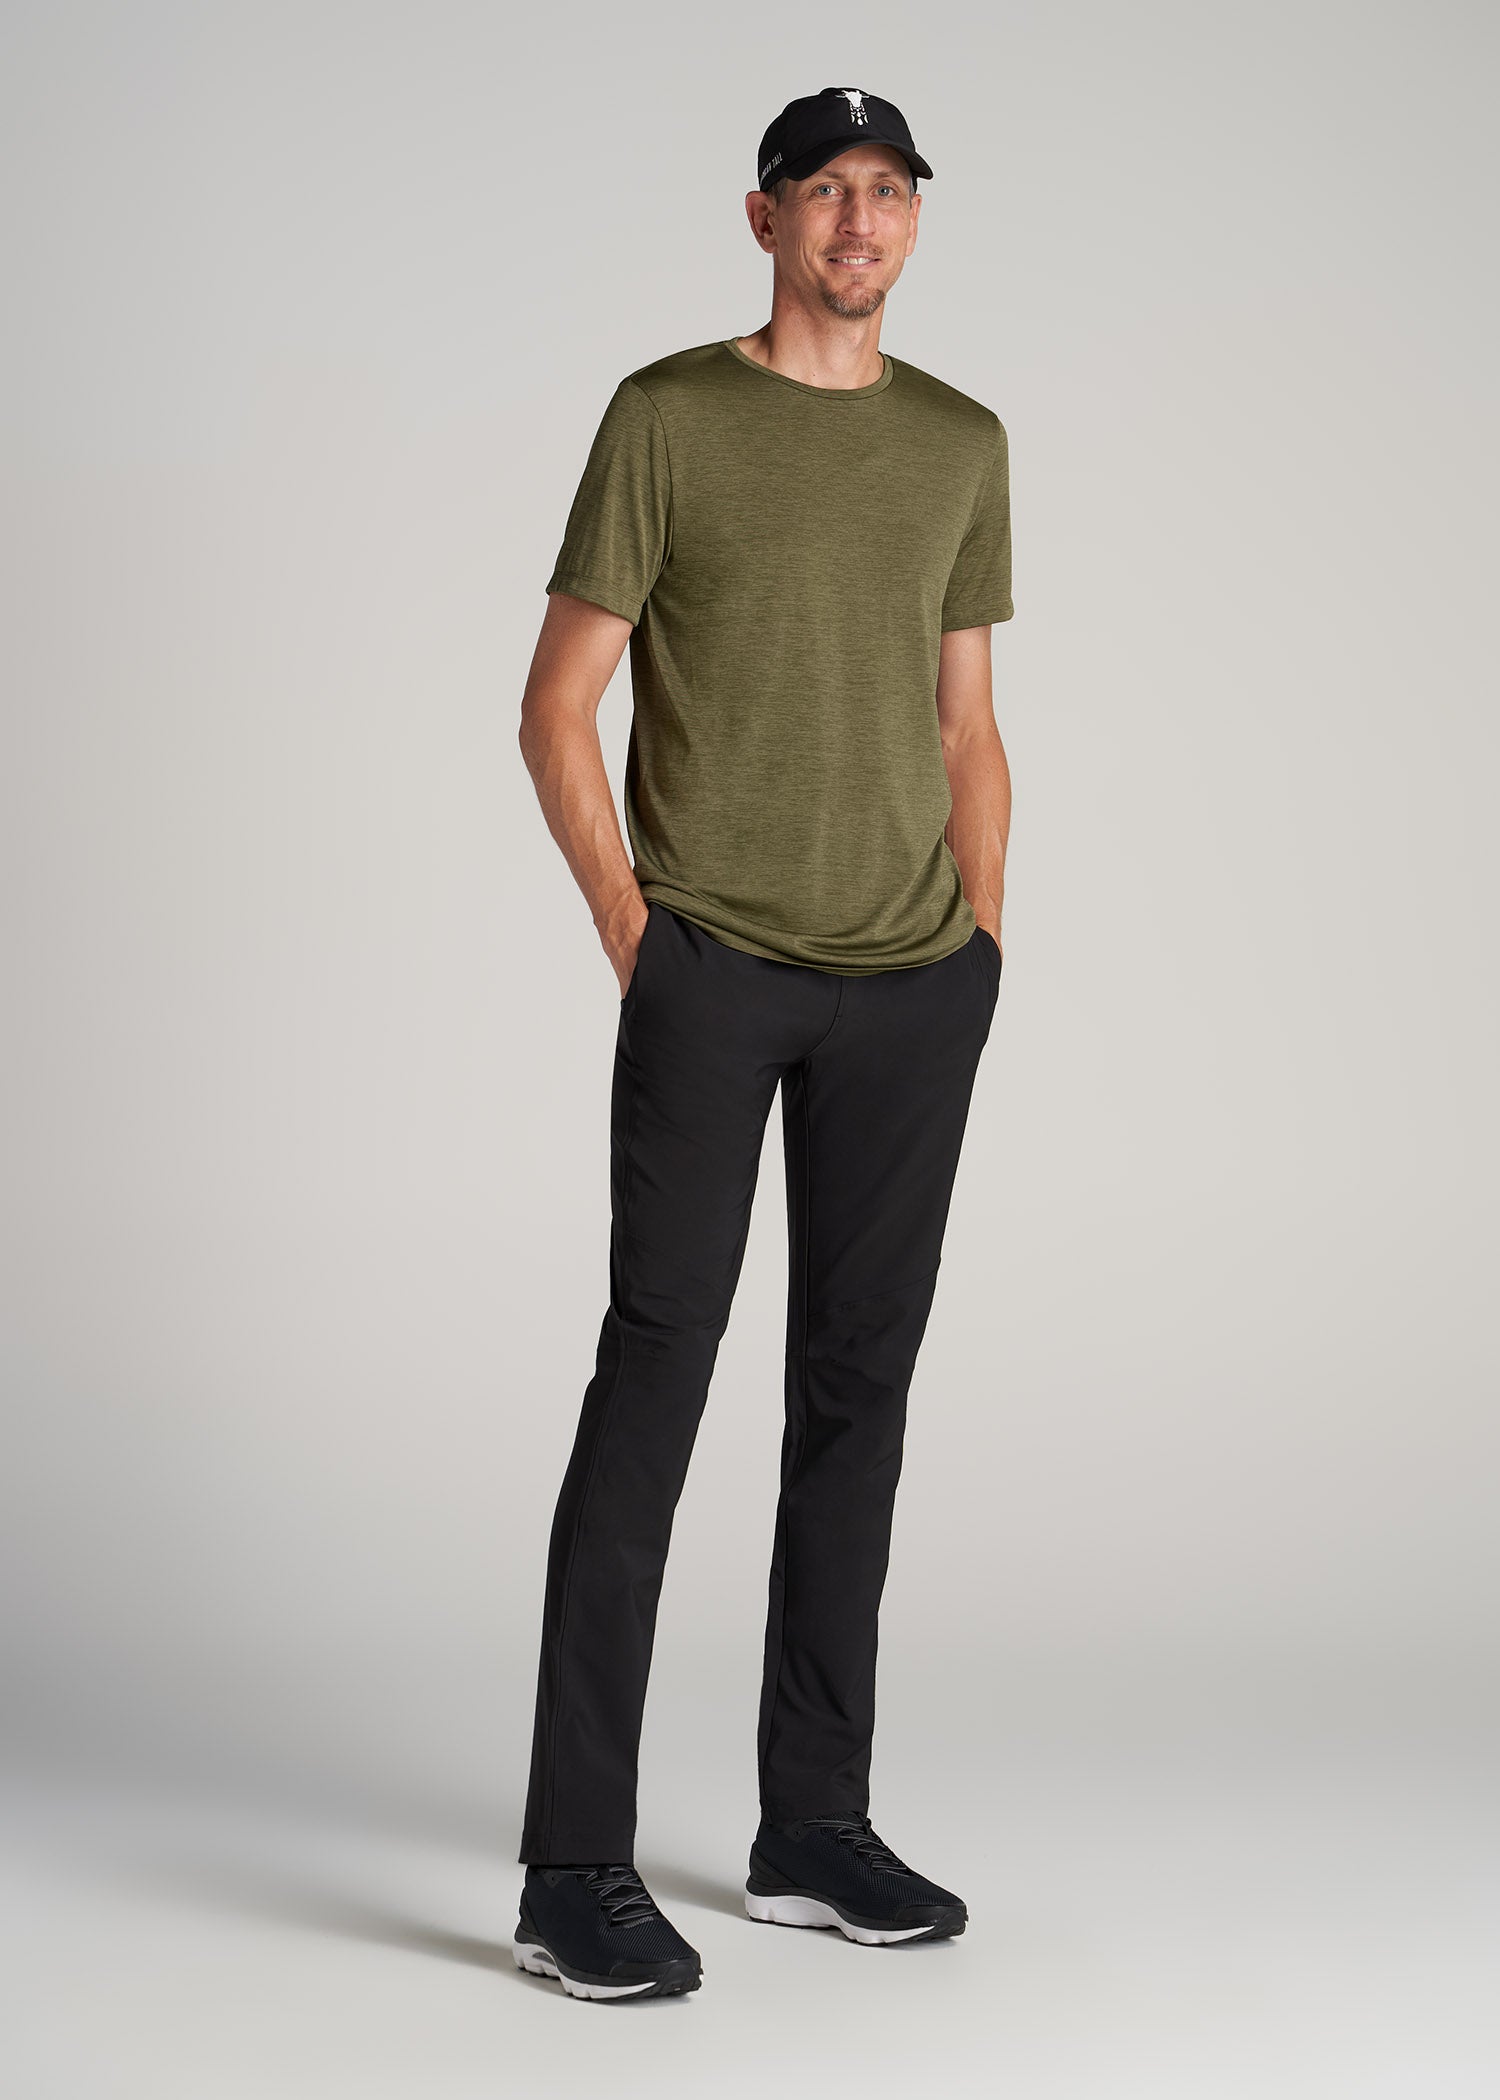 Men's Tall Performance Tech Ss Jersey Athletic Tee Olive Mix